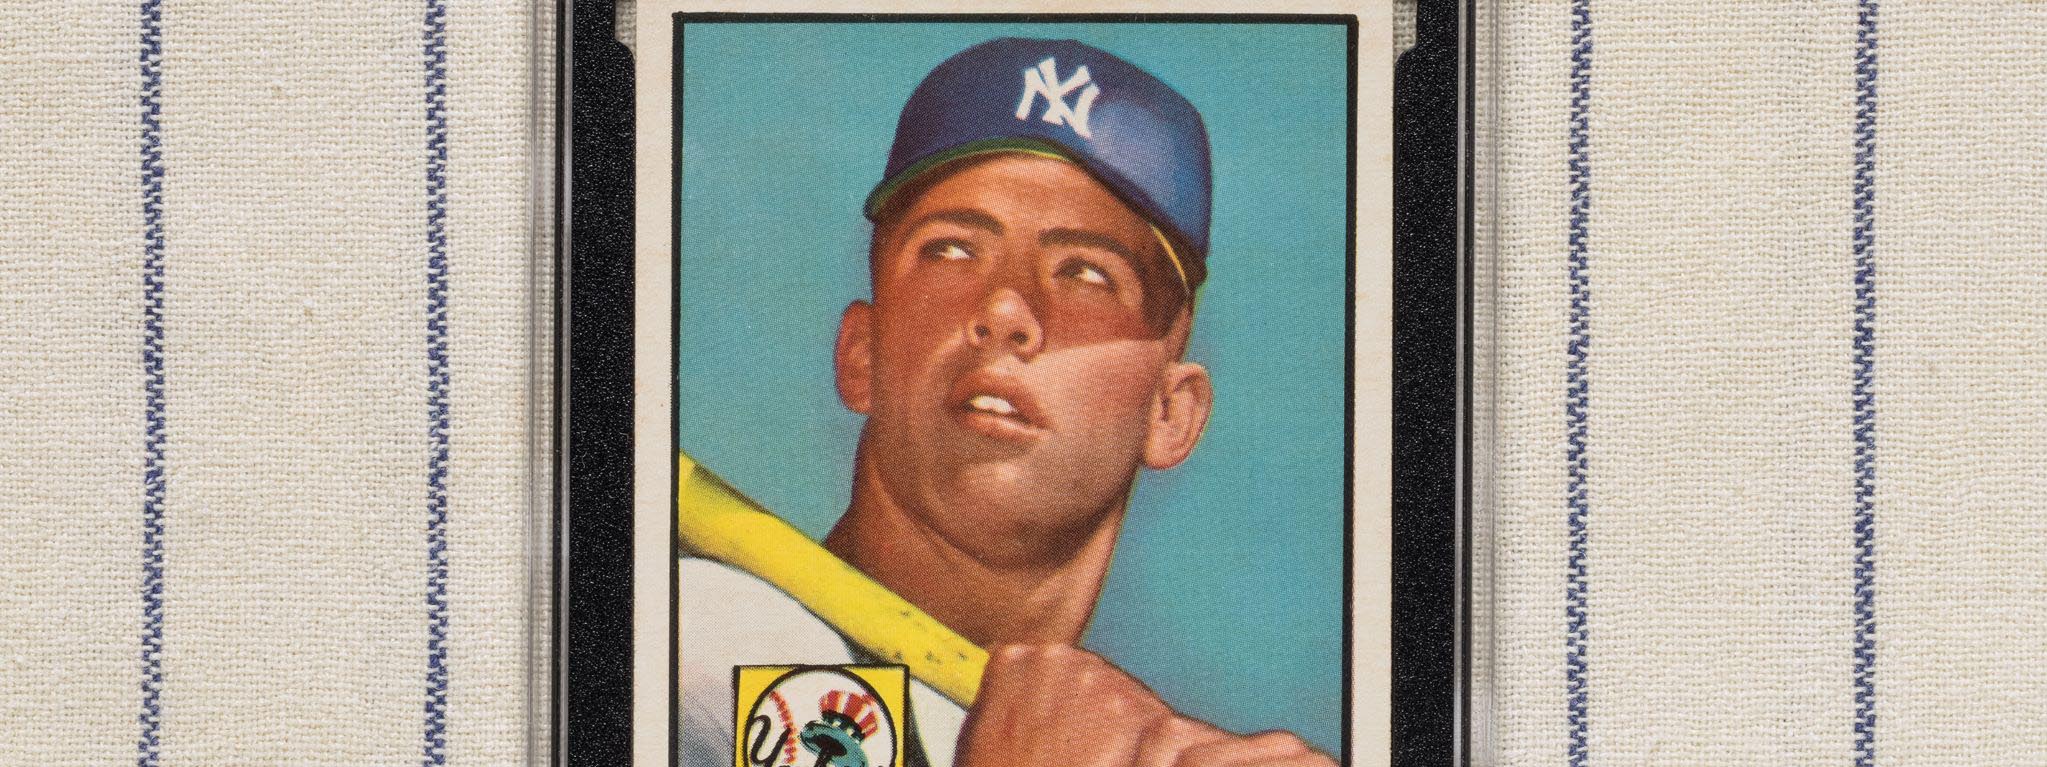 Mint-Condition Mickey Mantle Card Sells for Record-Shattering